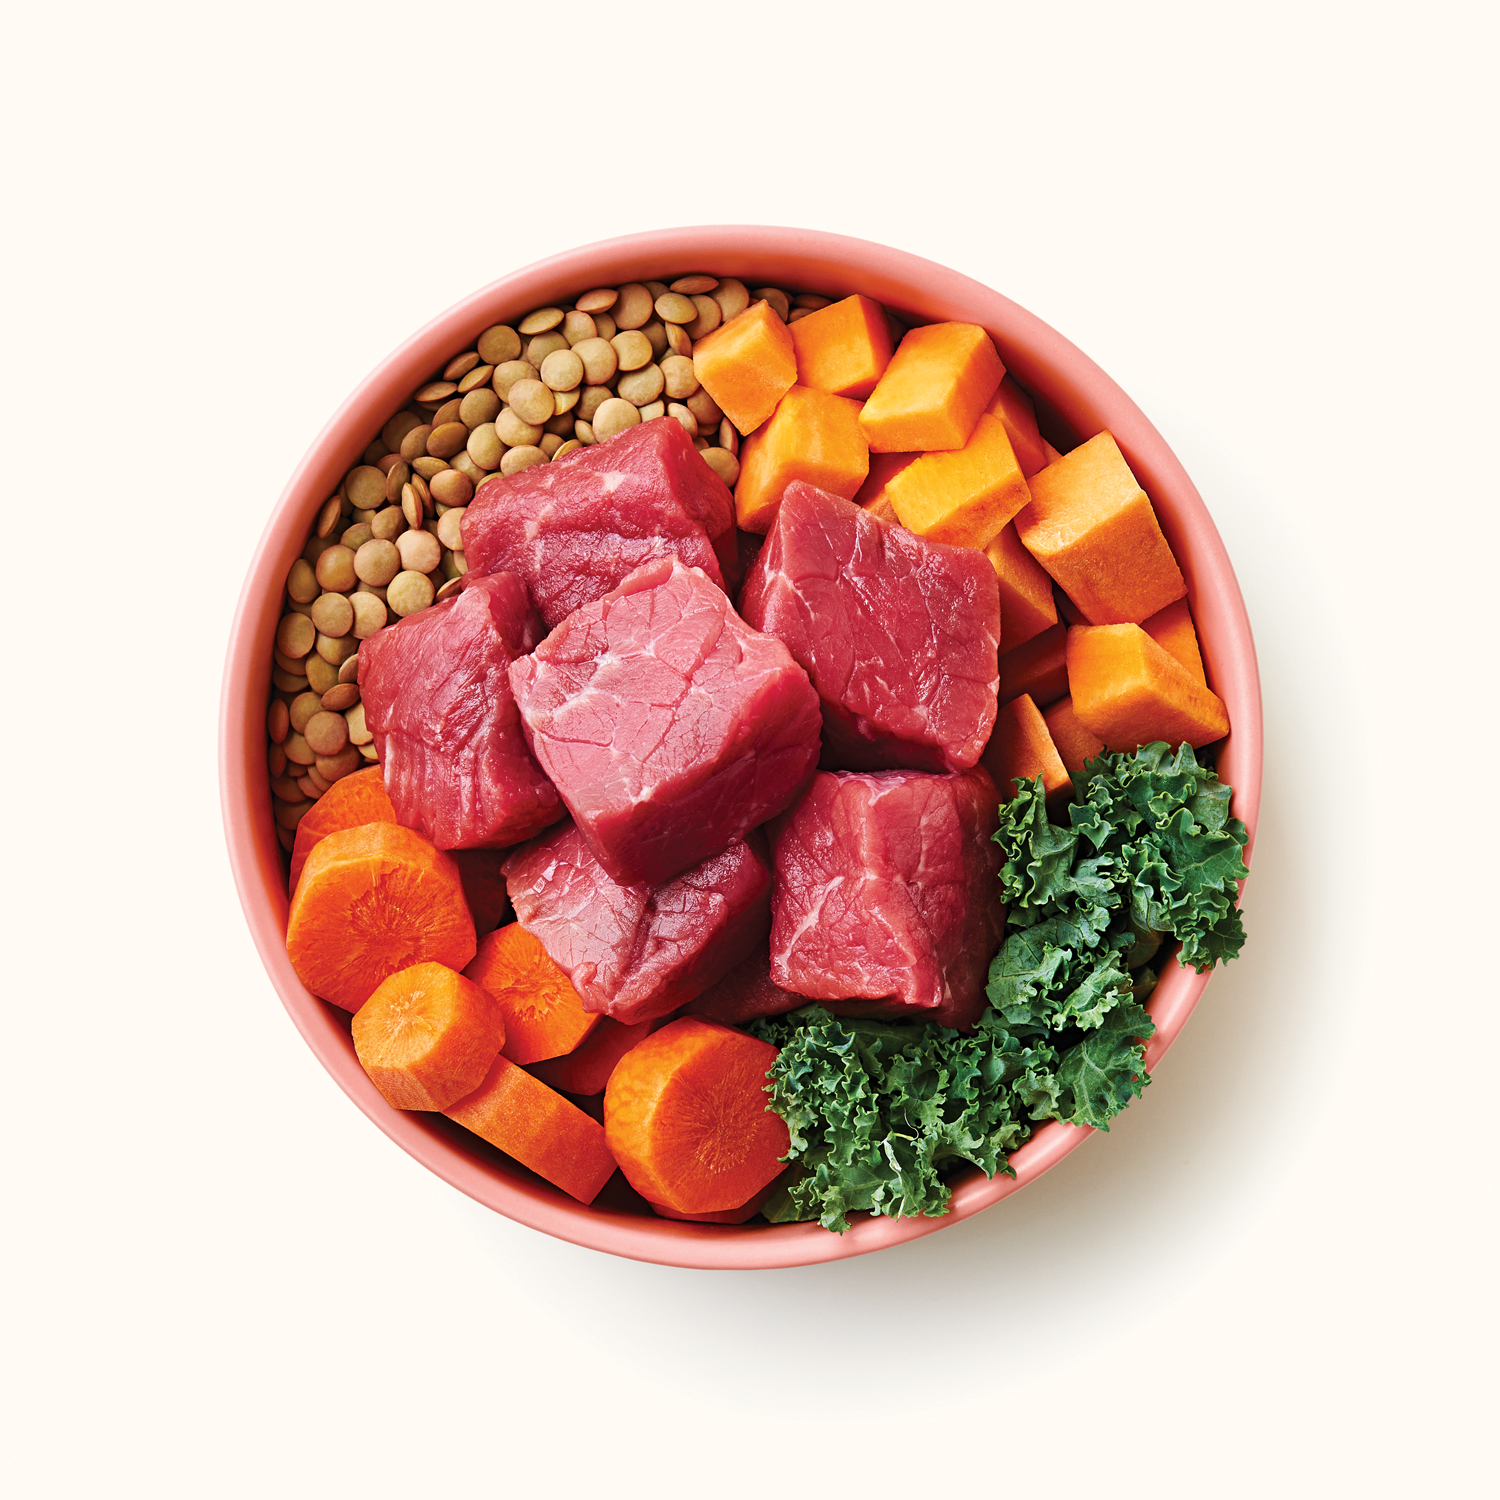 Zola Chow pet food ingredients, beef and carrots, photo by Freshmade.